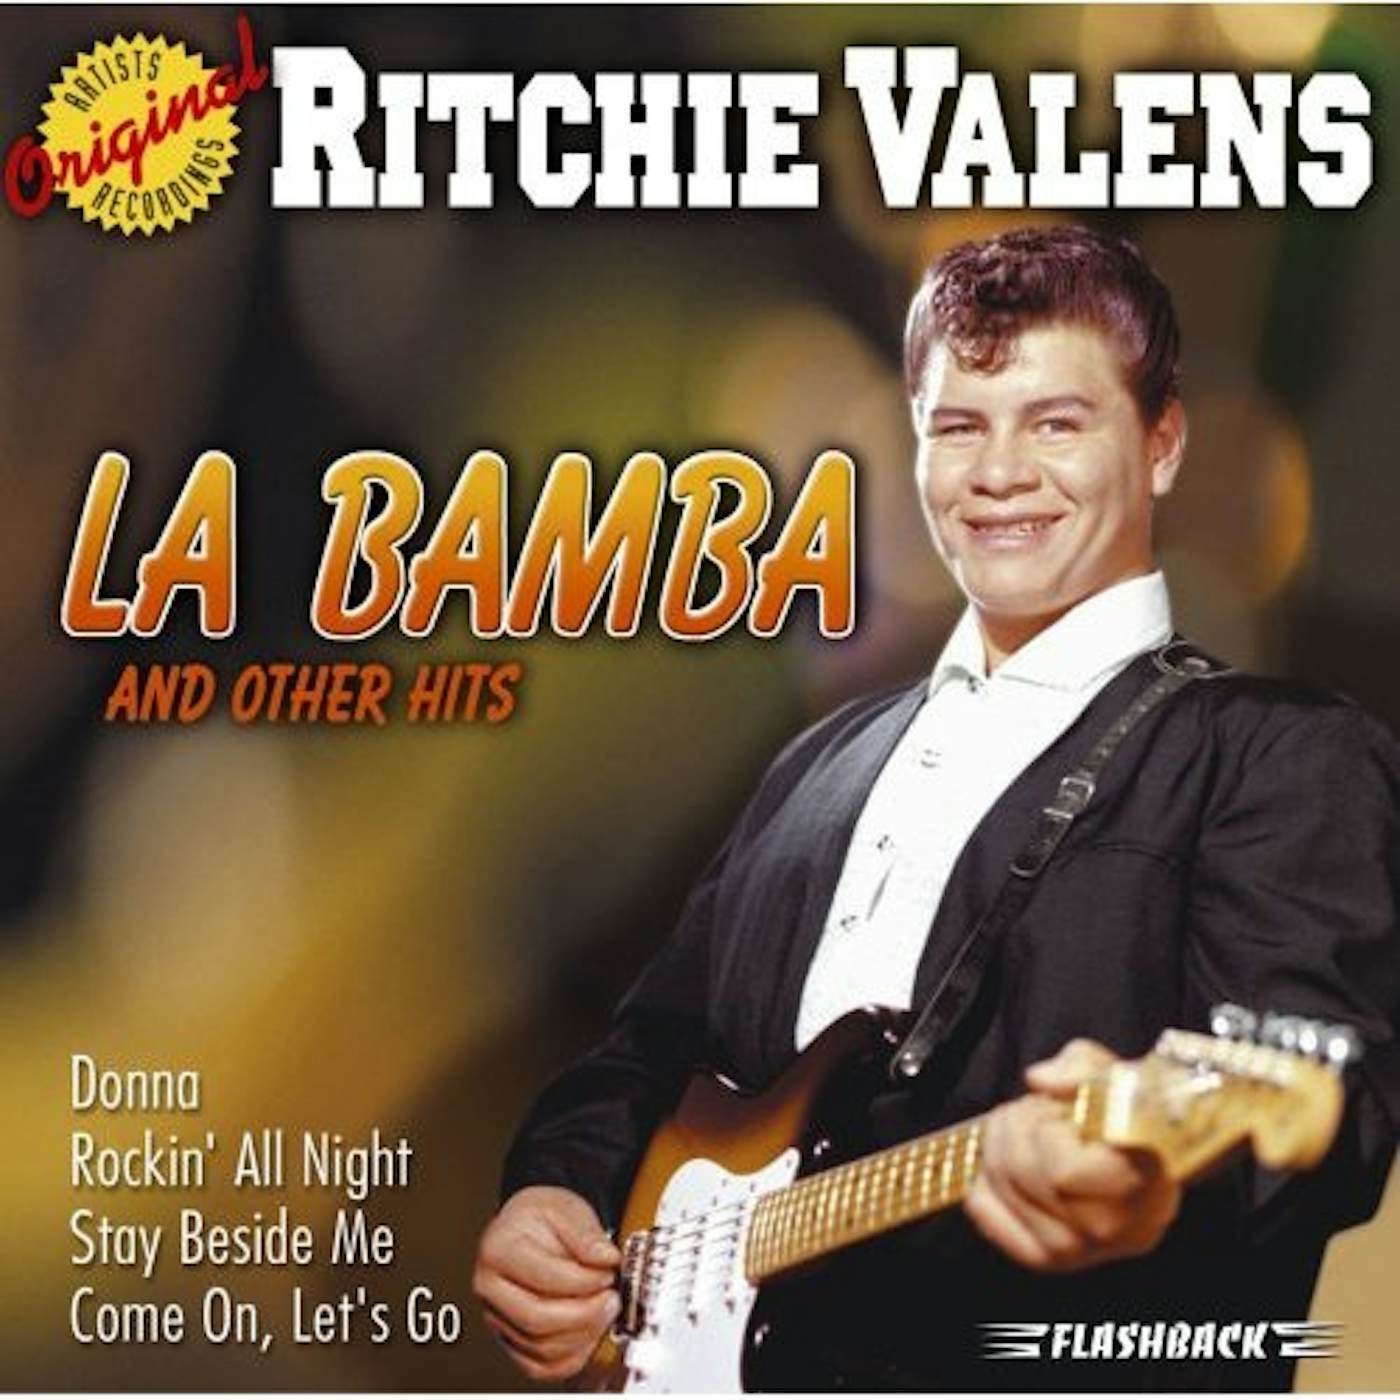 Ritchie Valens LA BAMBA & OTHER HITS CD